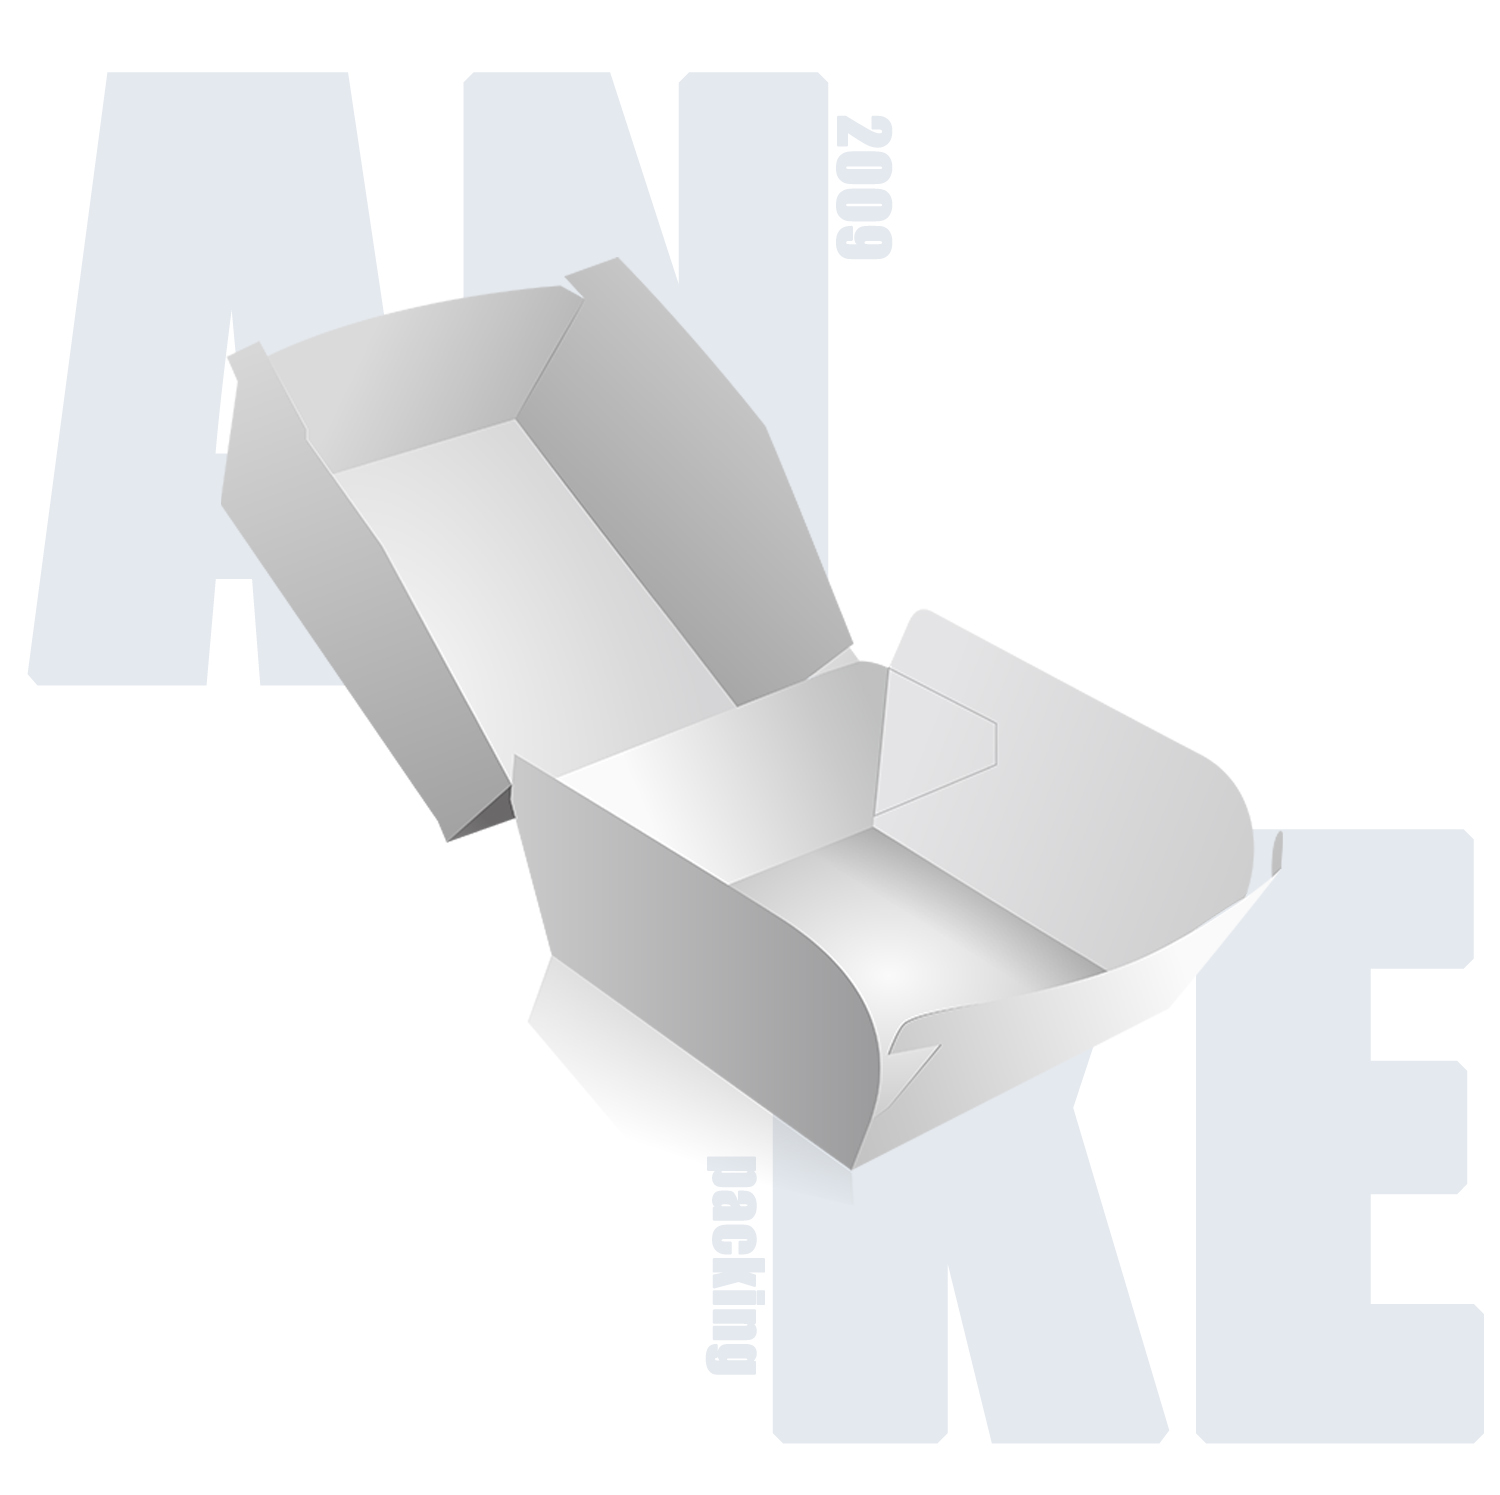 Custom Burger Boxes for Your Business | ANKE Packing Featured Image